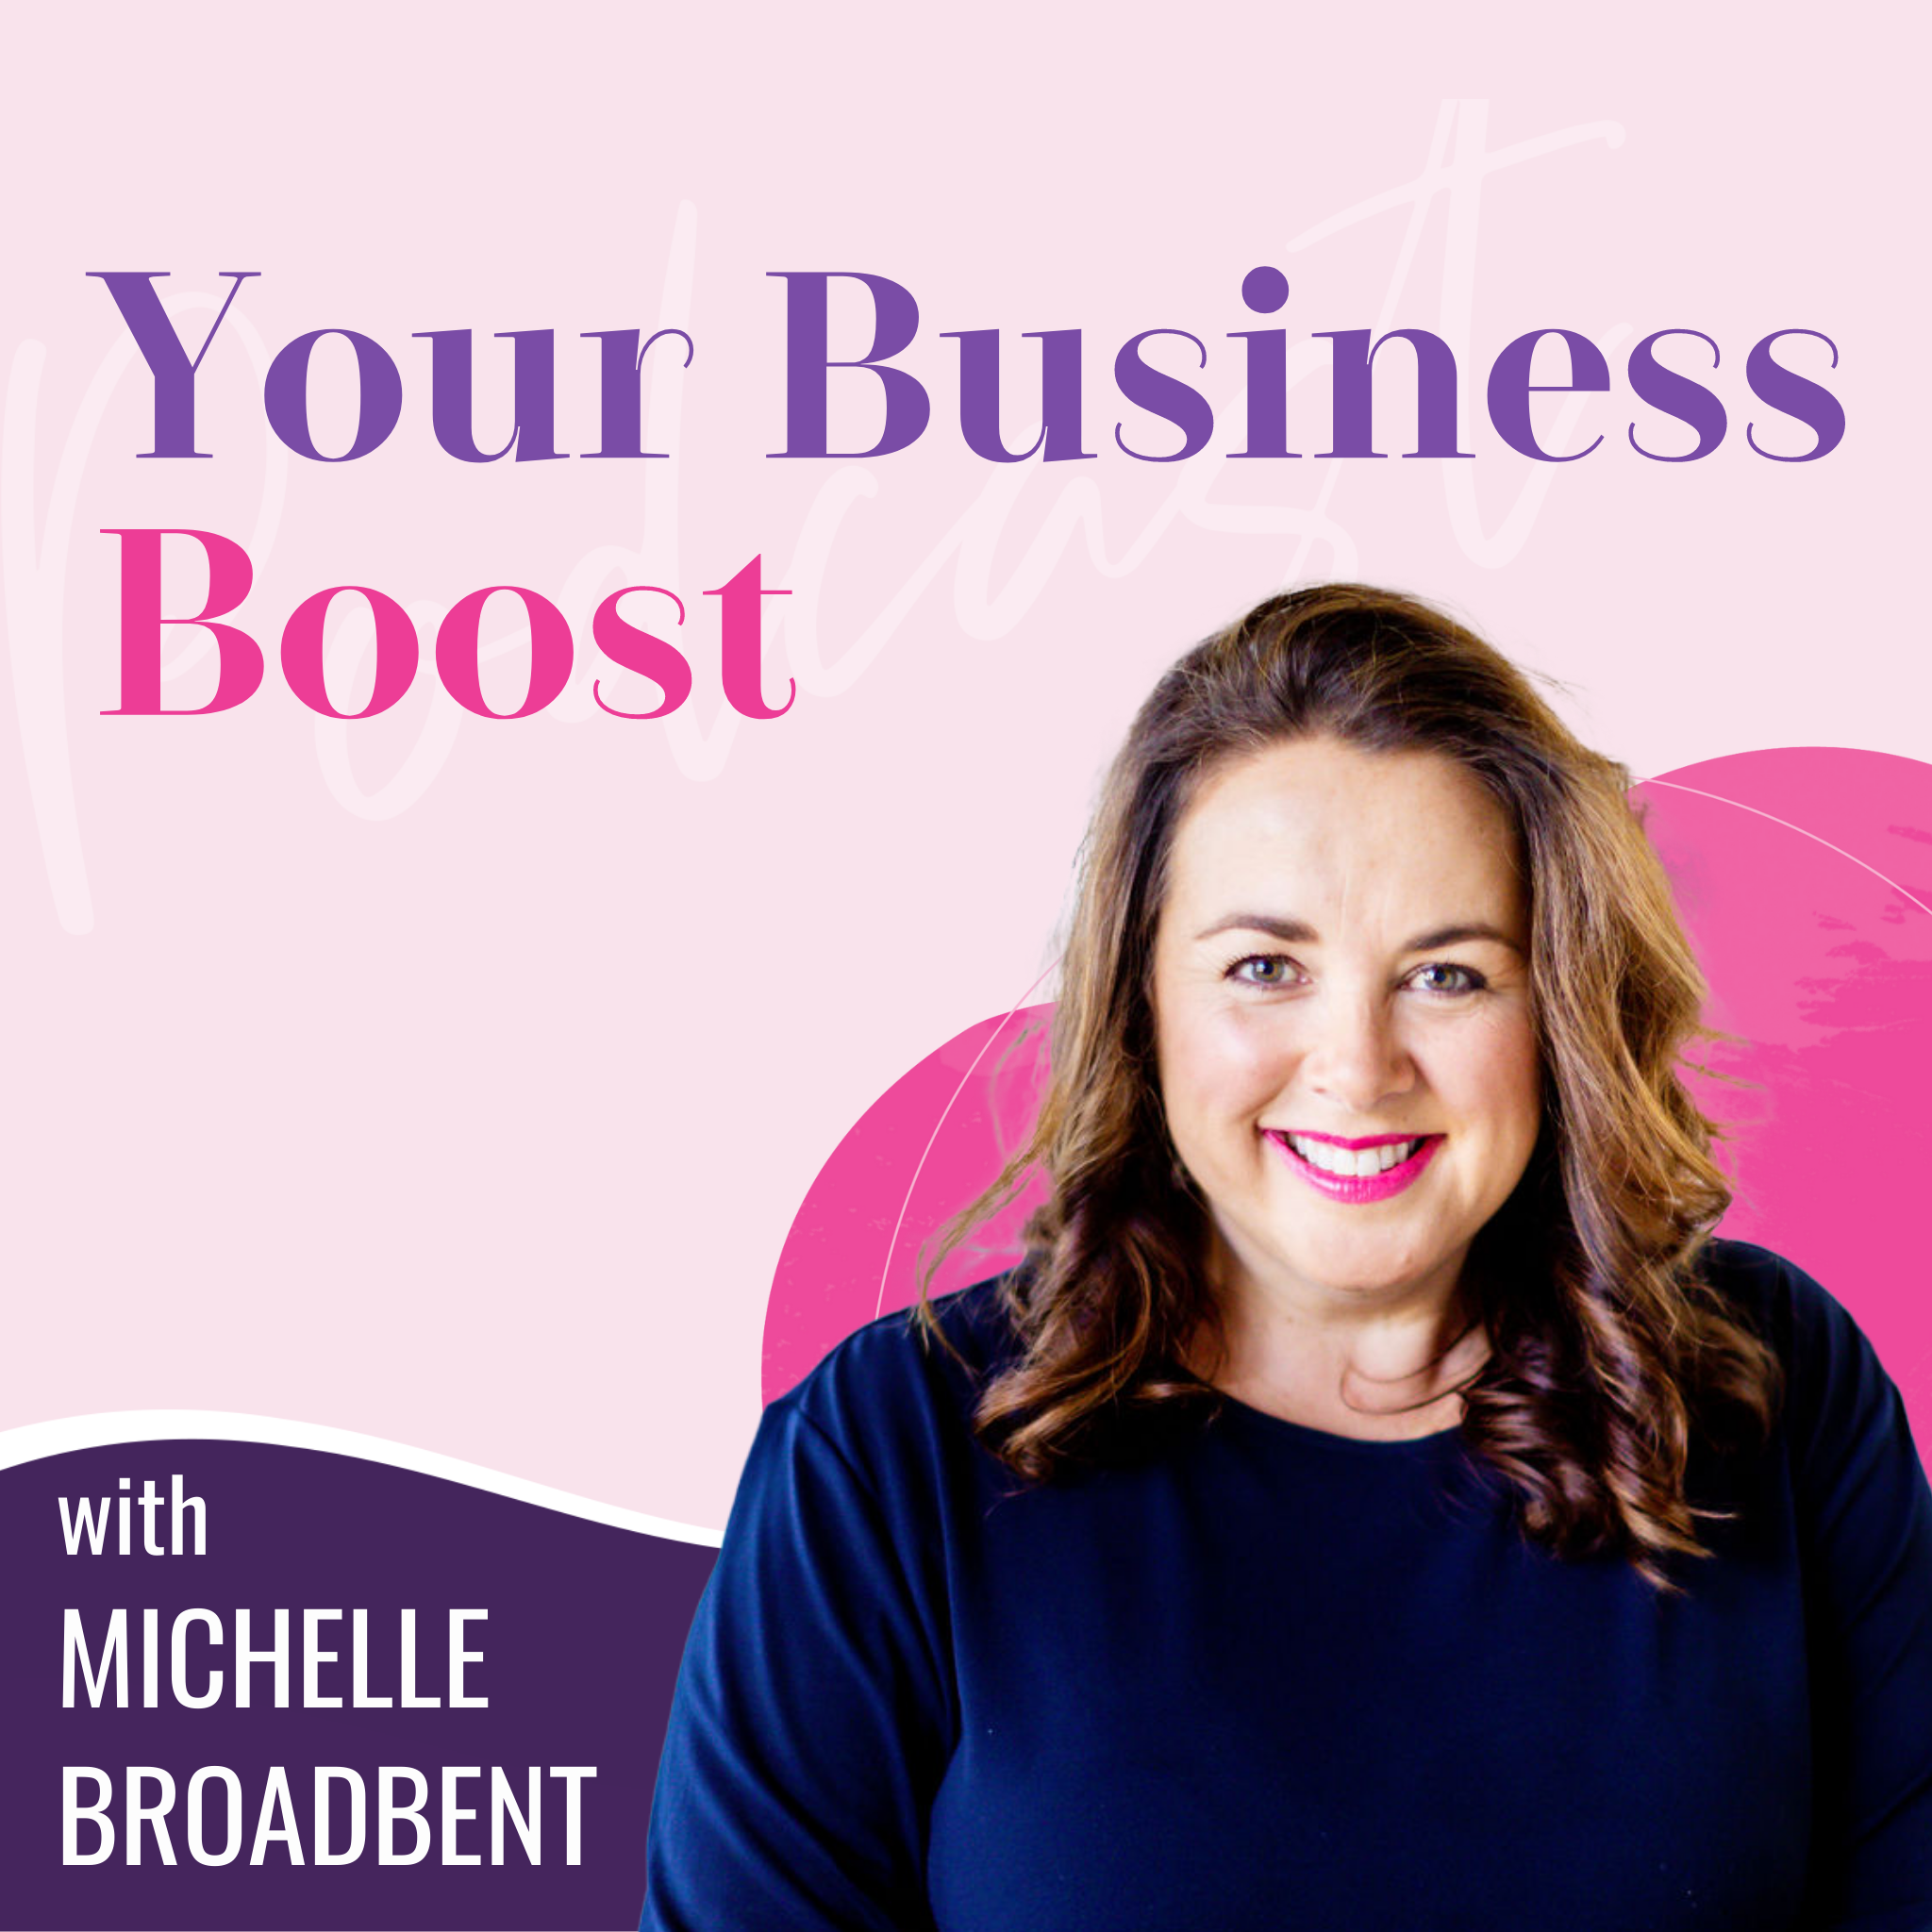 Part 1: Holiday Proof Your Business - The Runway